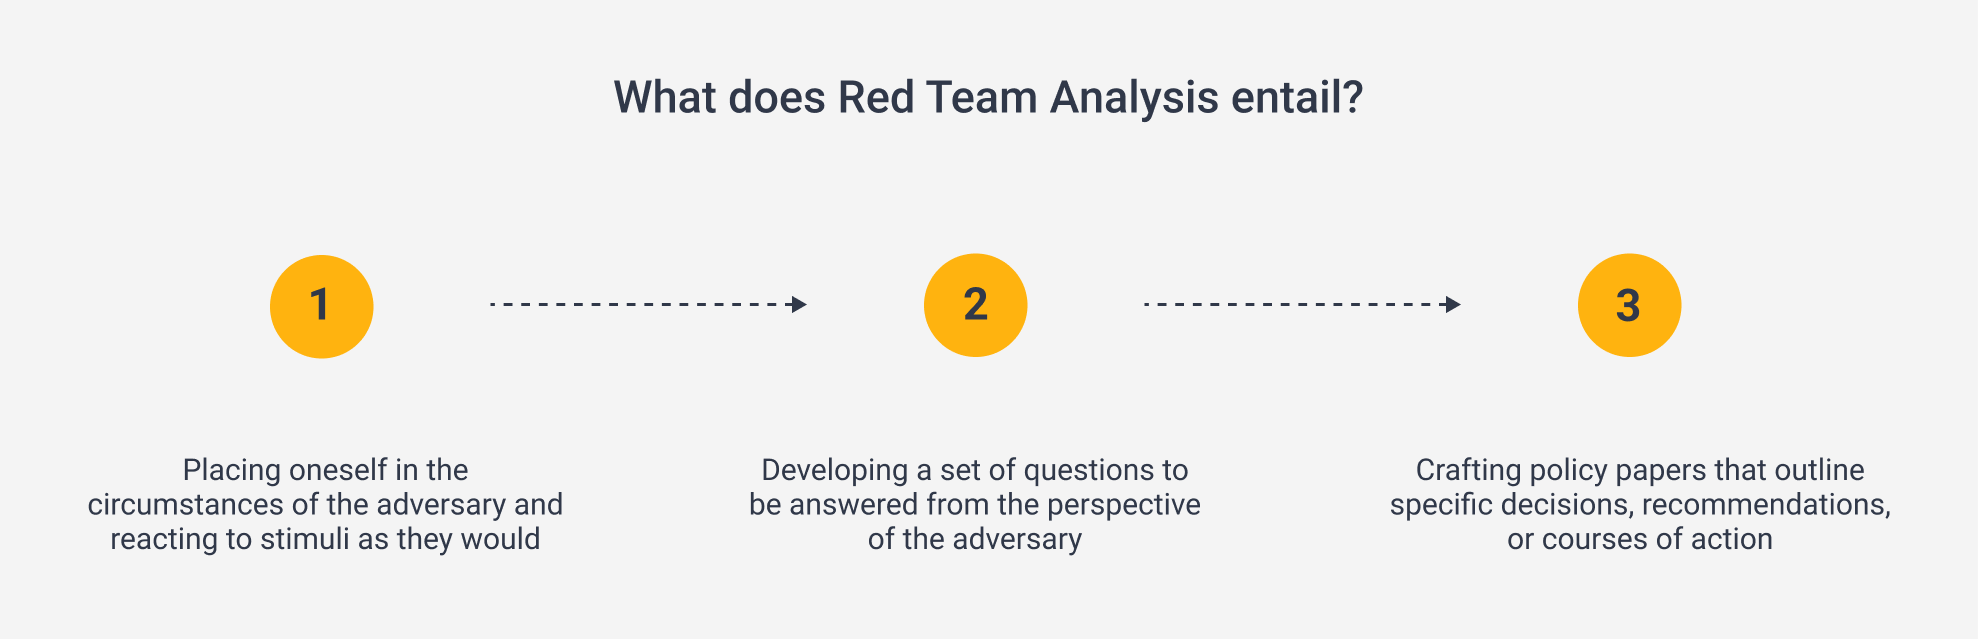 What Red Team Analysis entails